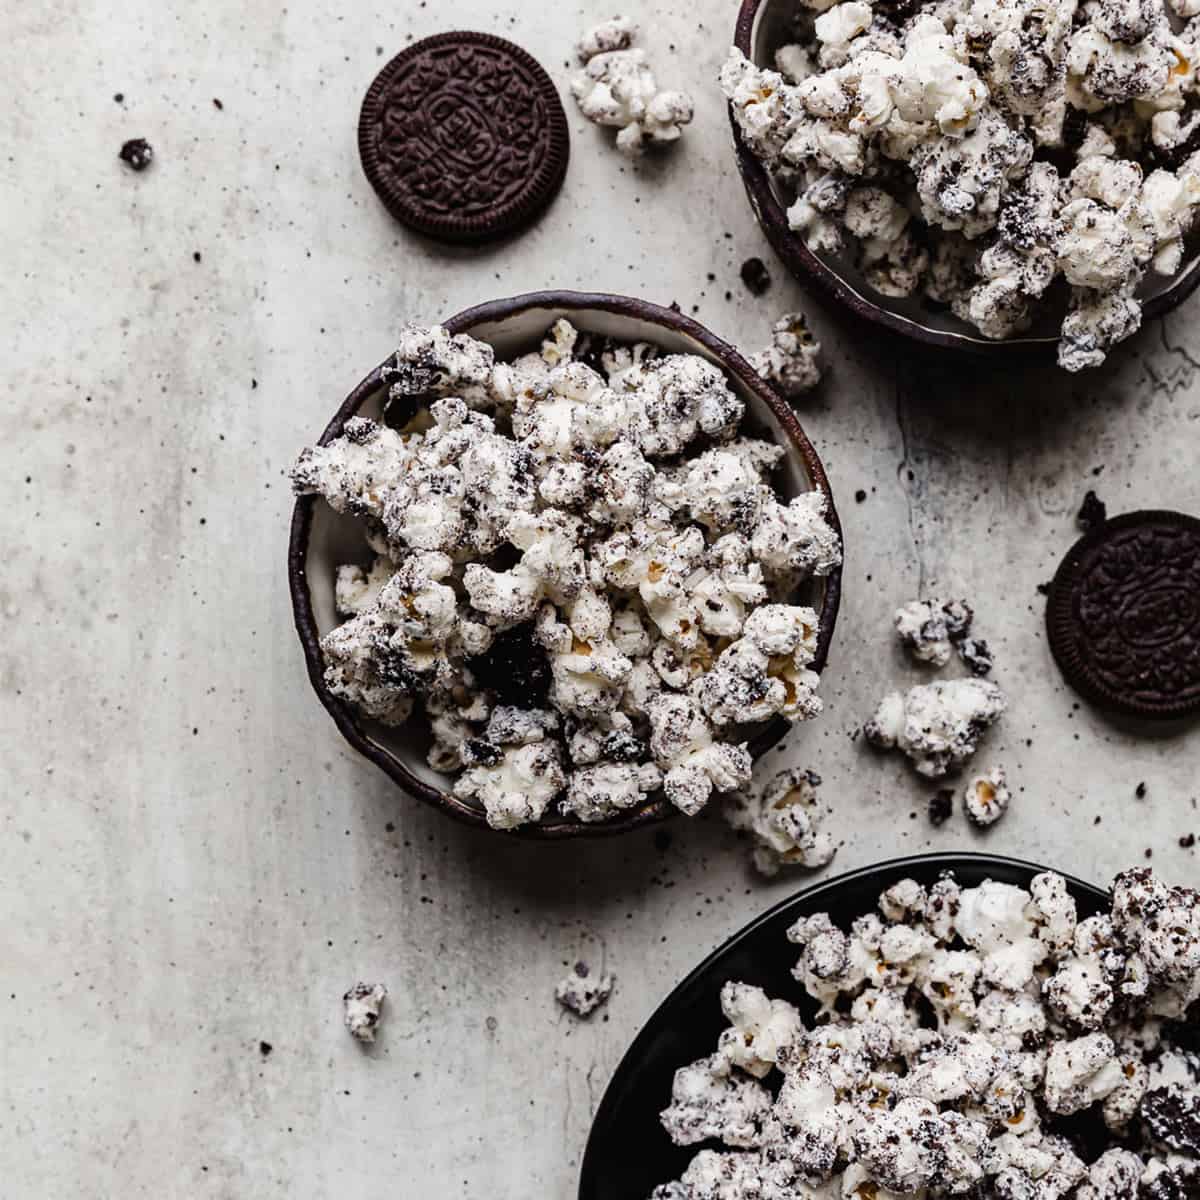 Oreo crumbs and white chocolate covered popcorn in a black bowl on a gray textured background.